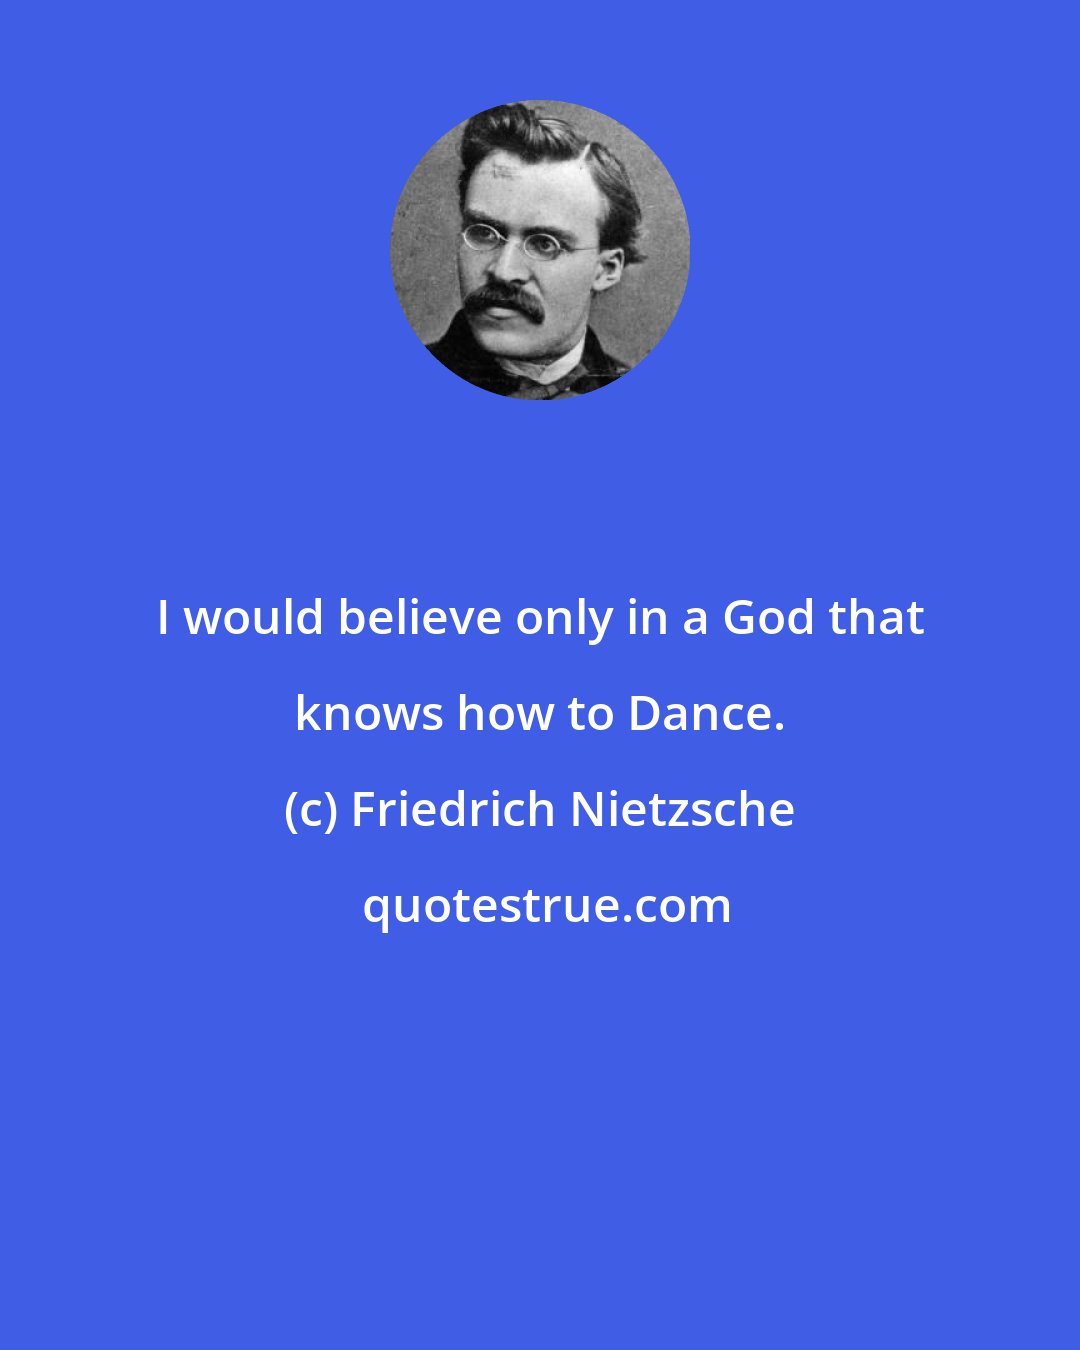 Friedrich Nietzsche: I would believe only in a God that knows how to Dance.